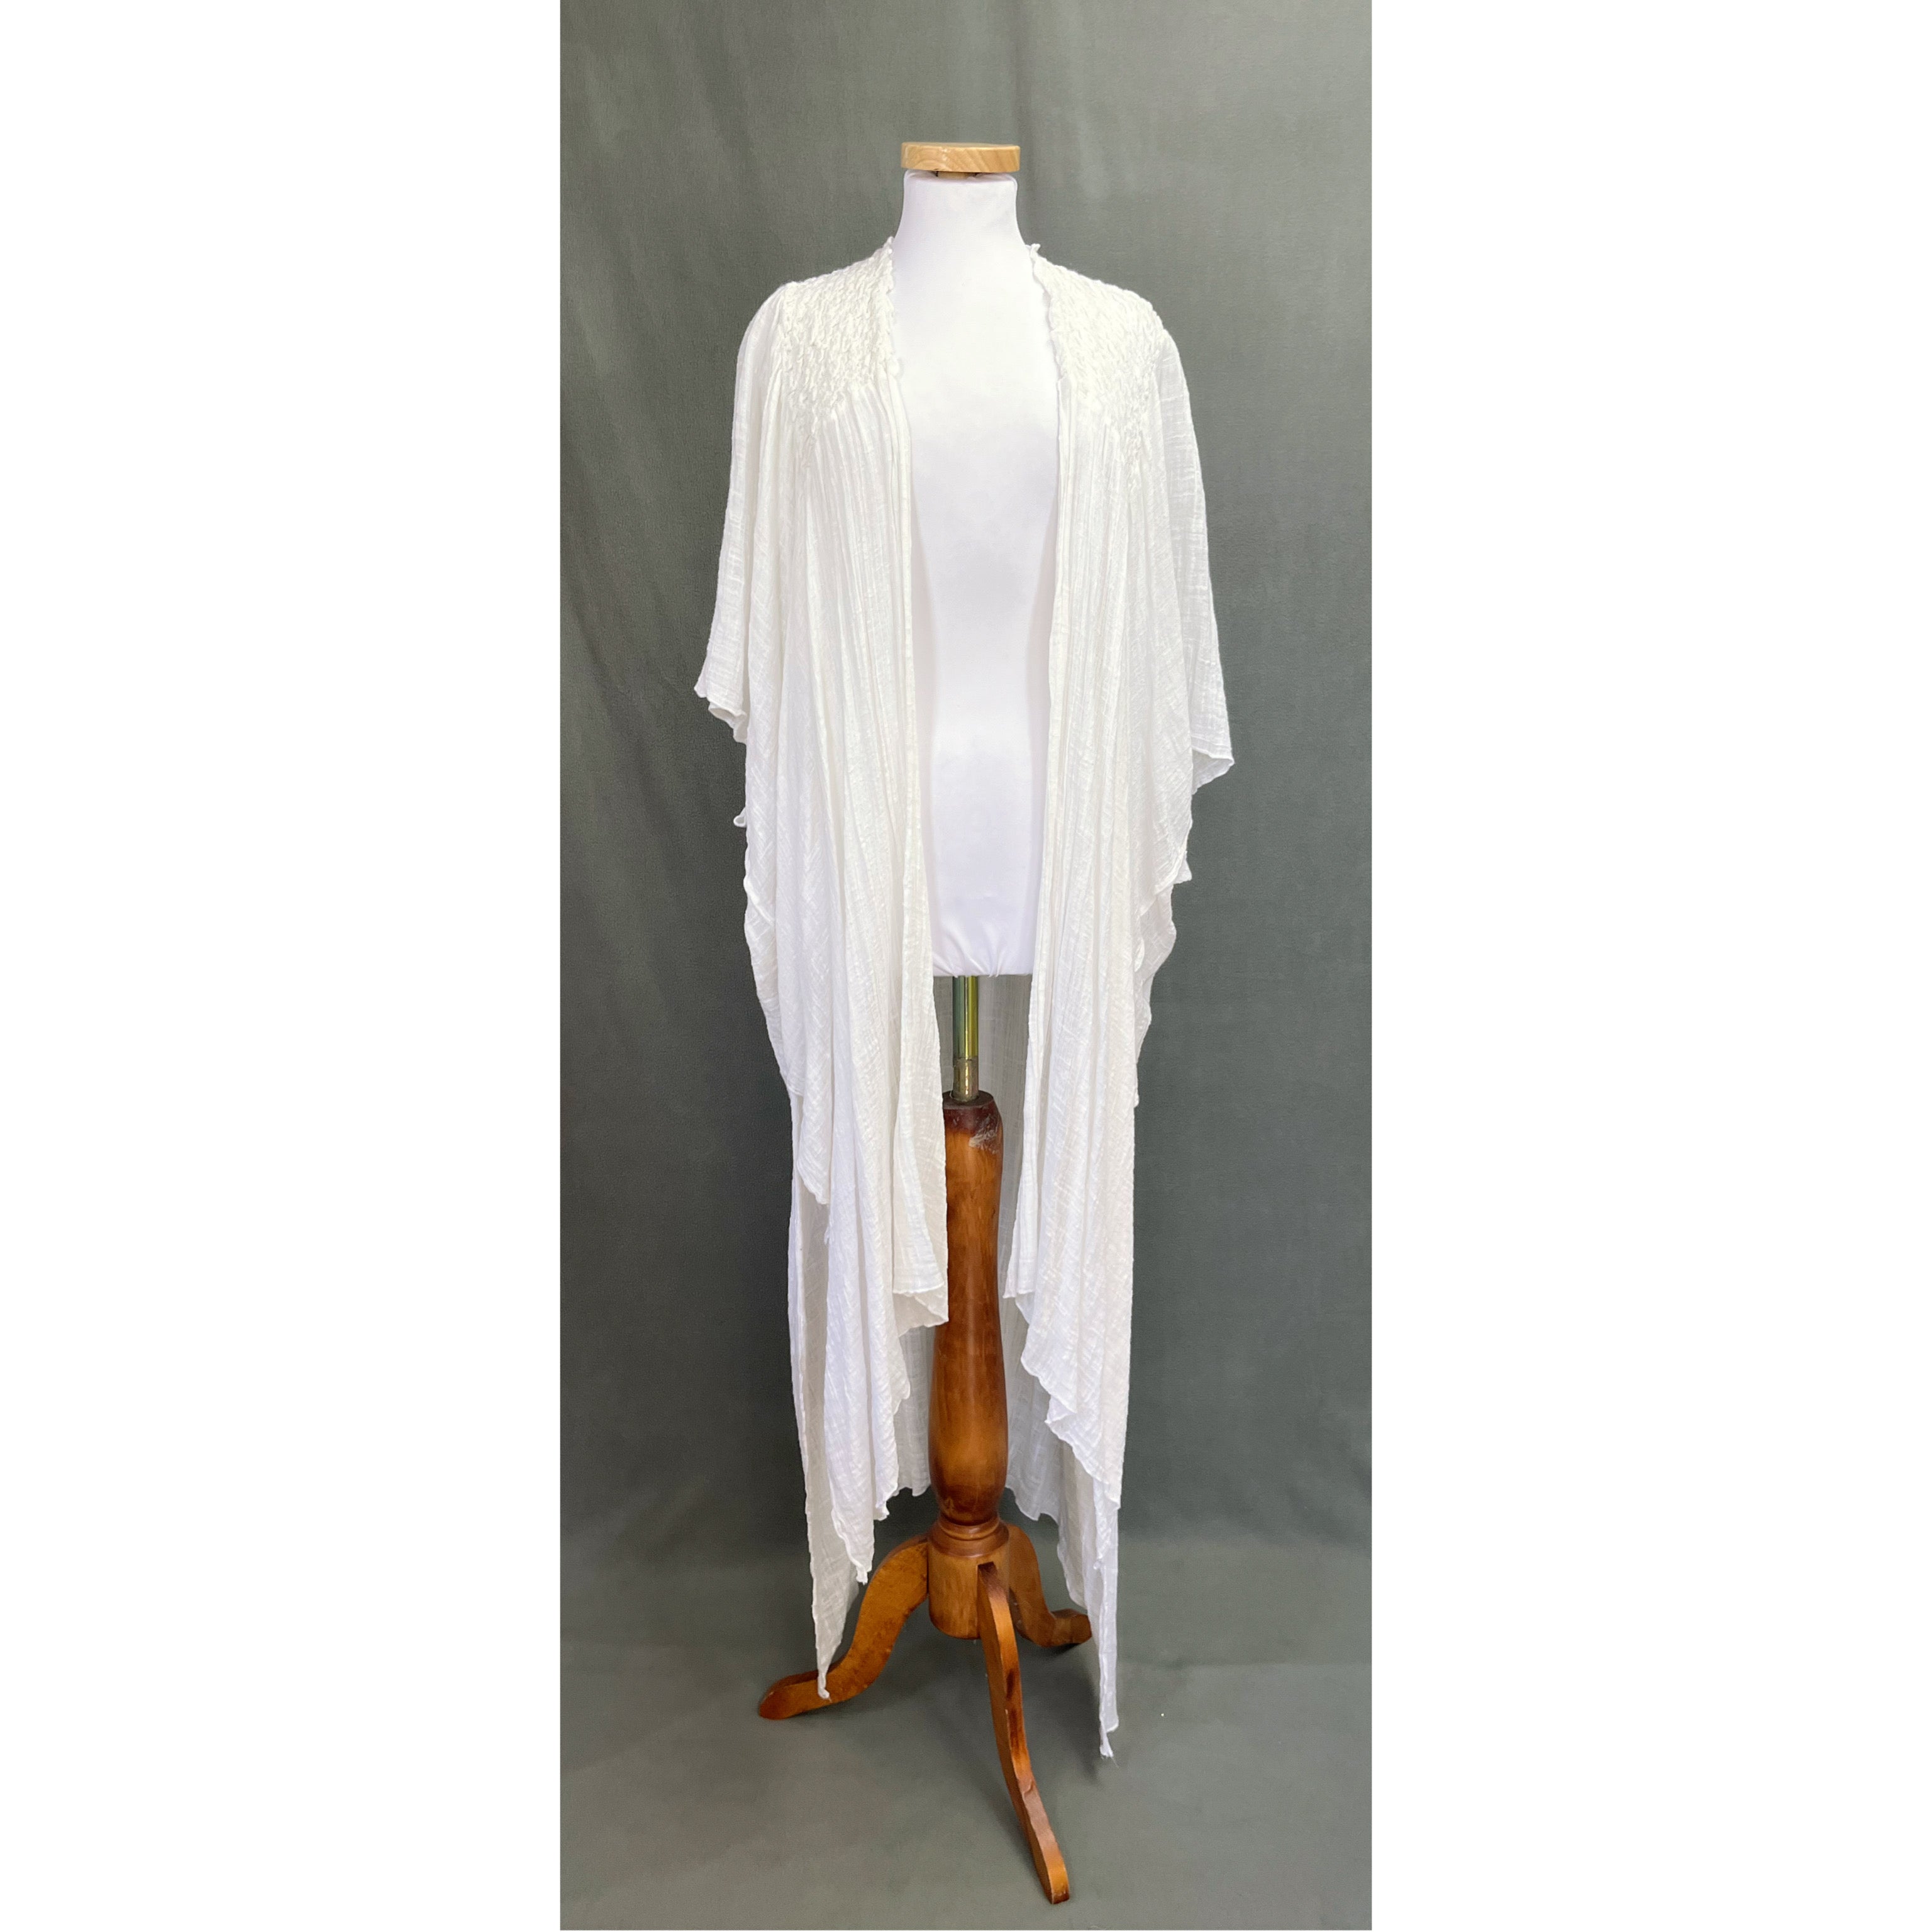 Free People ivory kimono, size S, NEW WITH TAGS!